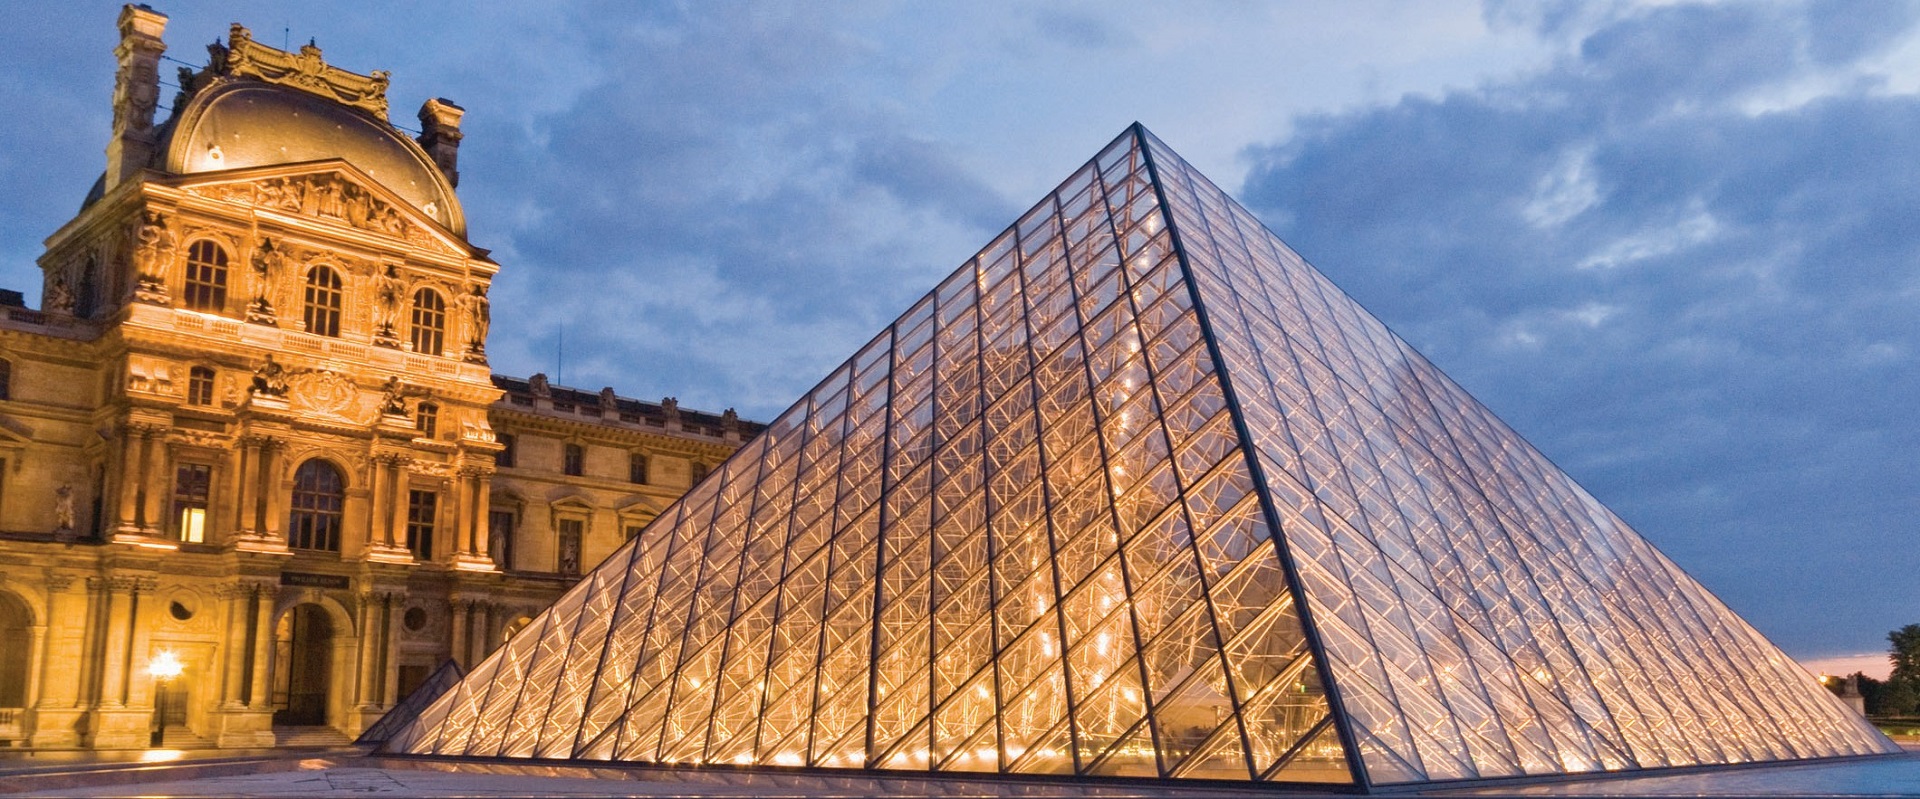 The Louvre. Image: Getty